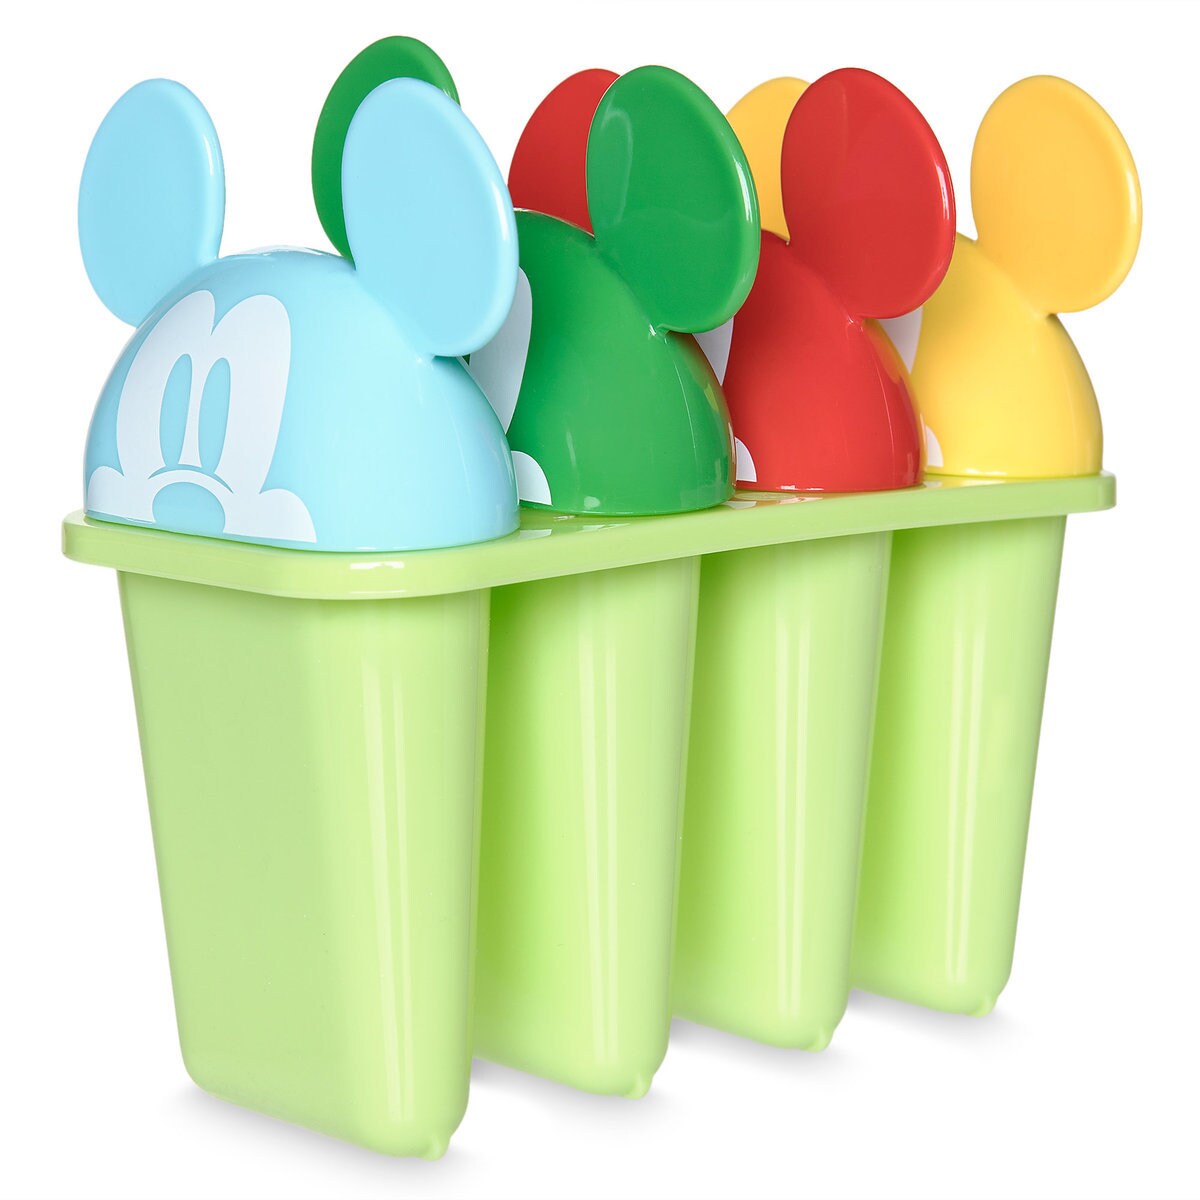 Product Image of Mickey Mouse Popsicle Molds - Summer Fun # 1